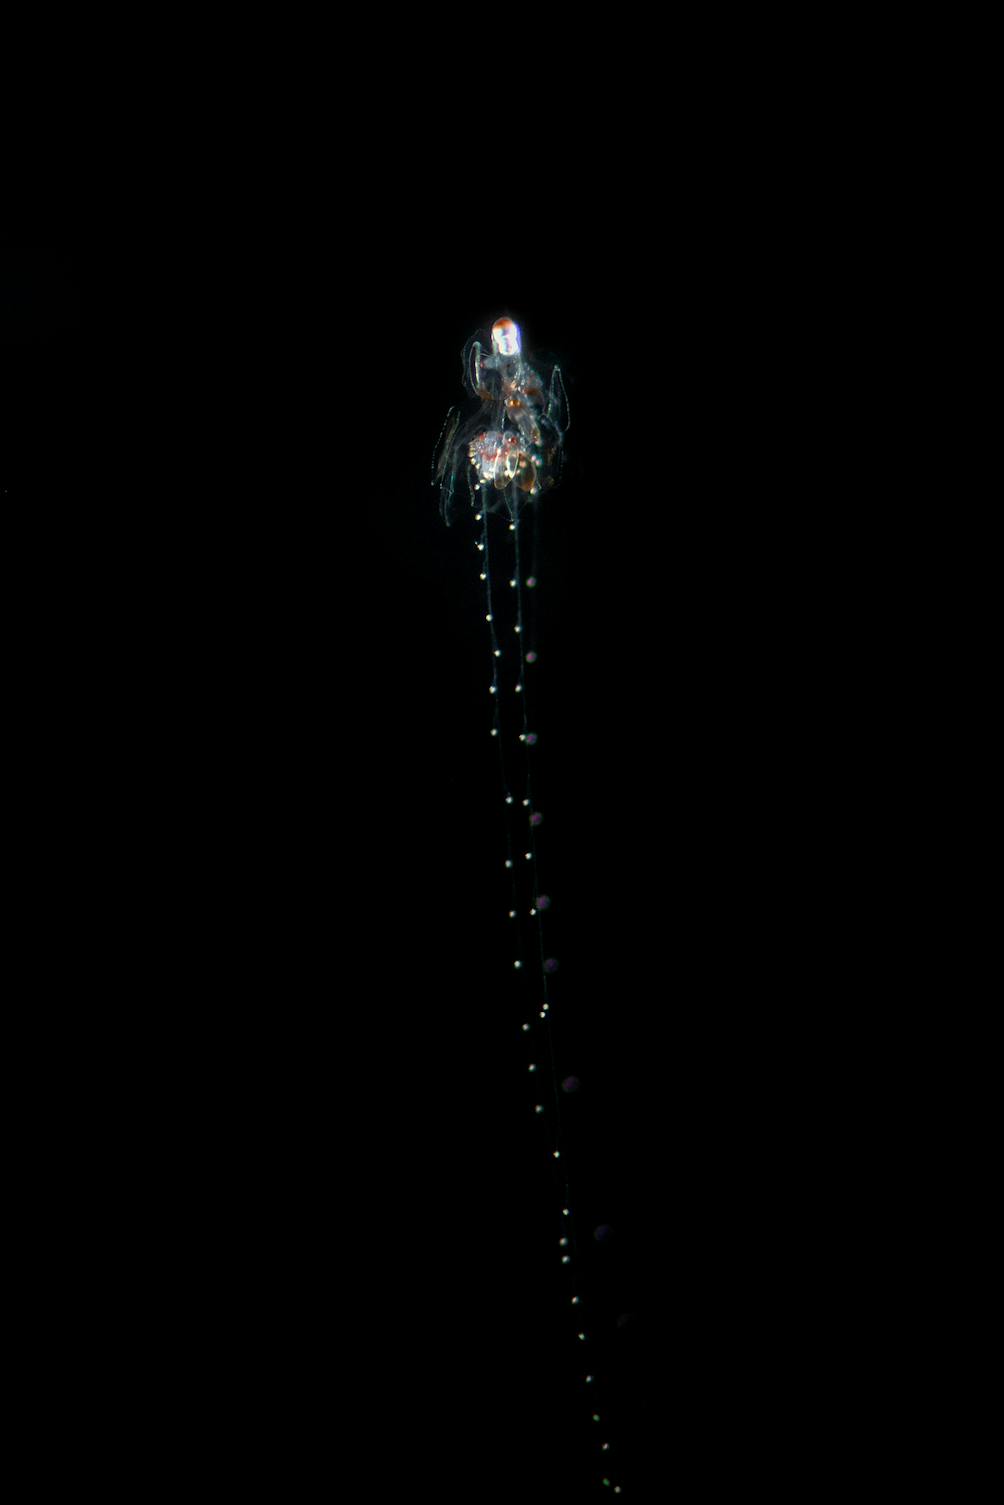 common siphonophore